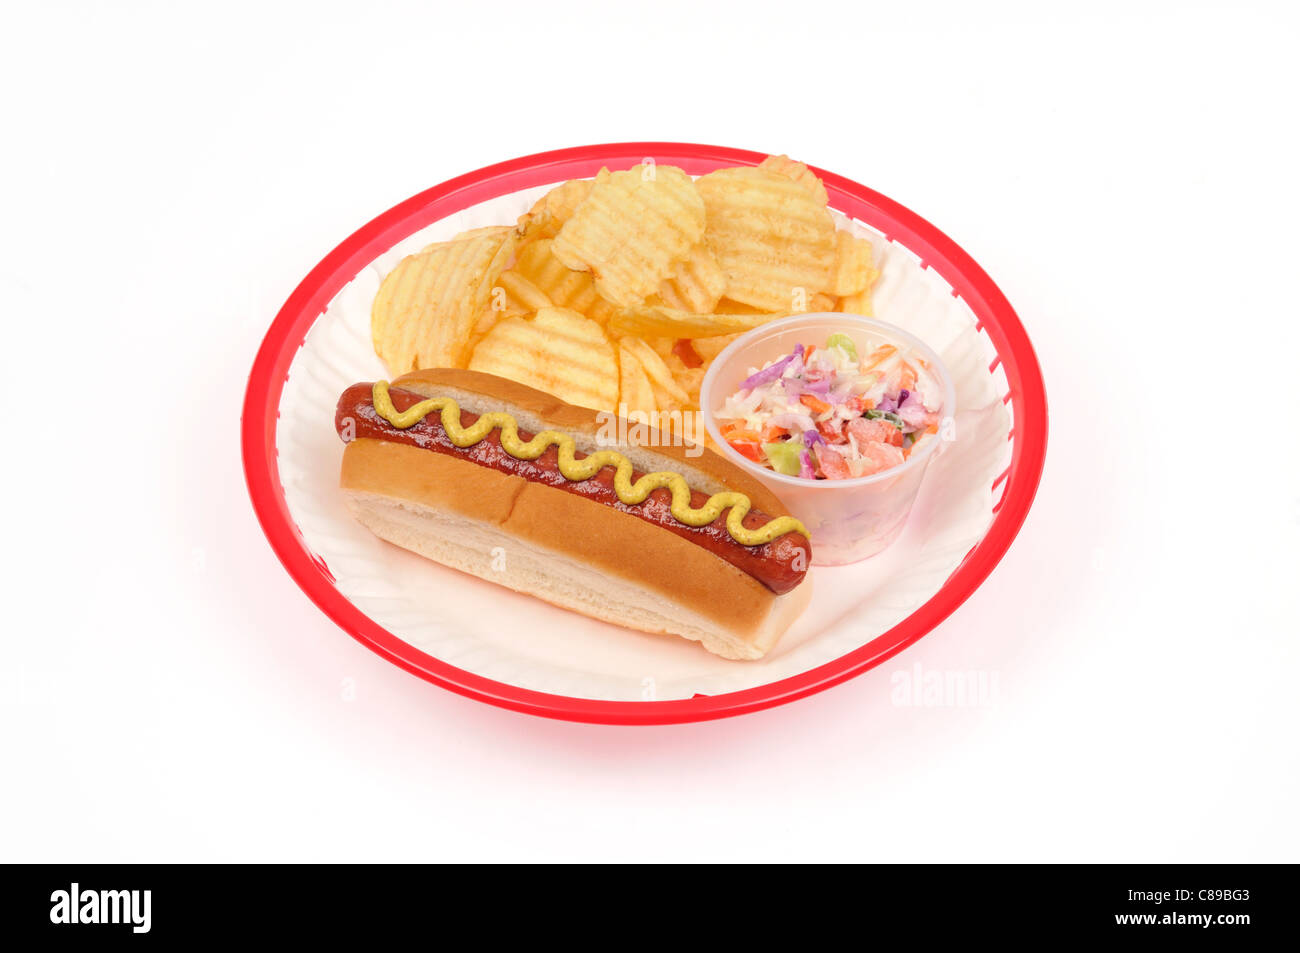 Hotdog with mustard, crisps or potato chips and coleslaw on white paper plate in red plastic basket on white background cutout. Stock Photo